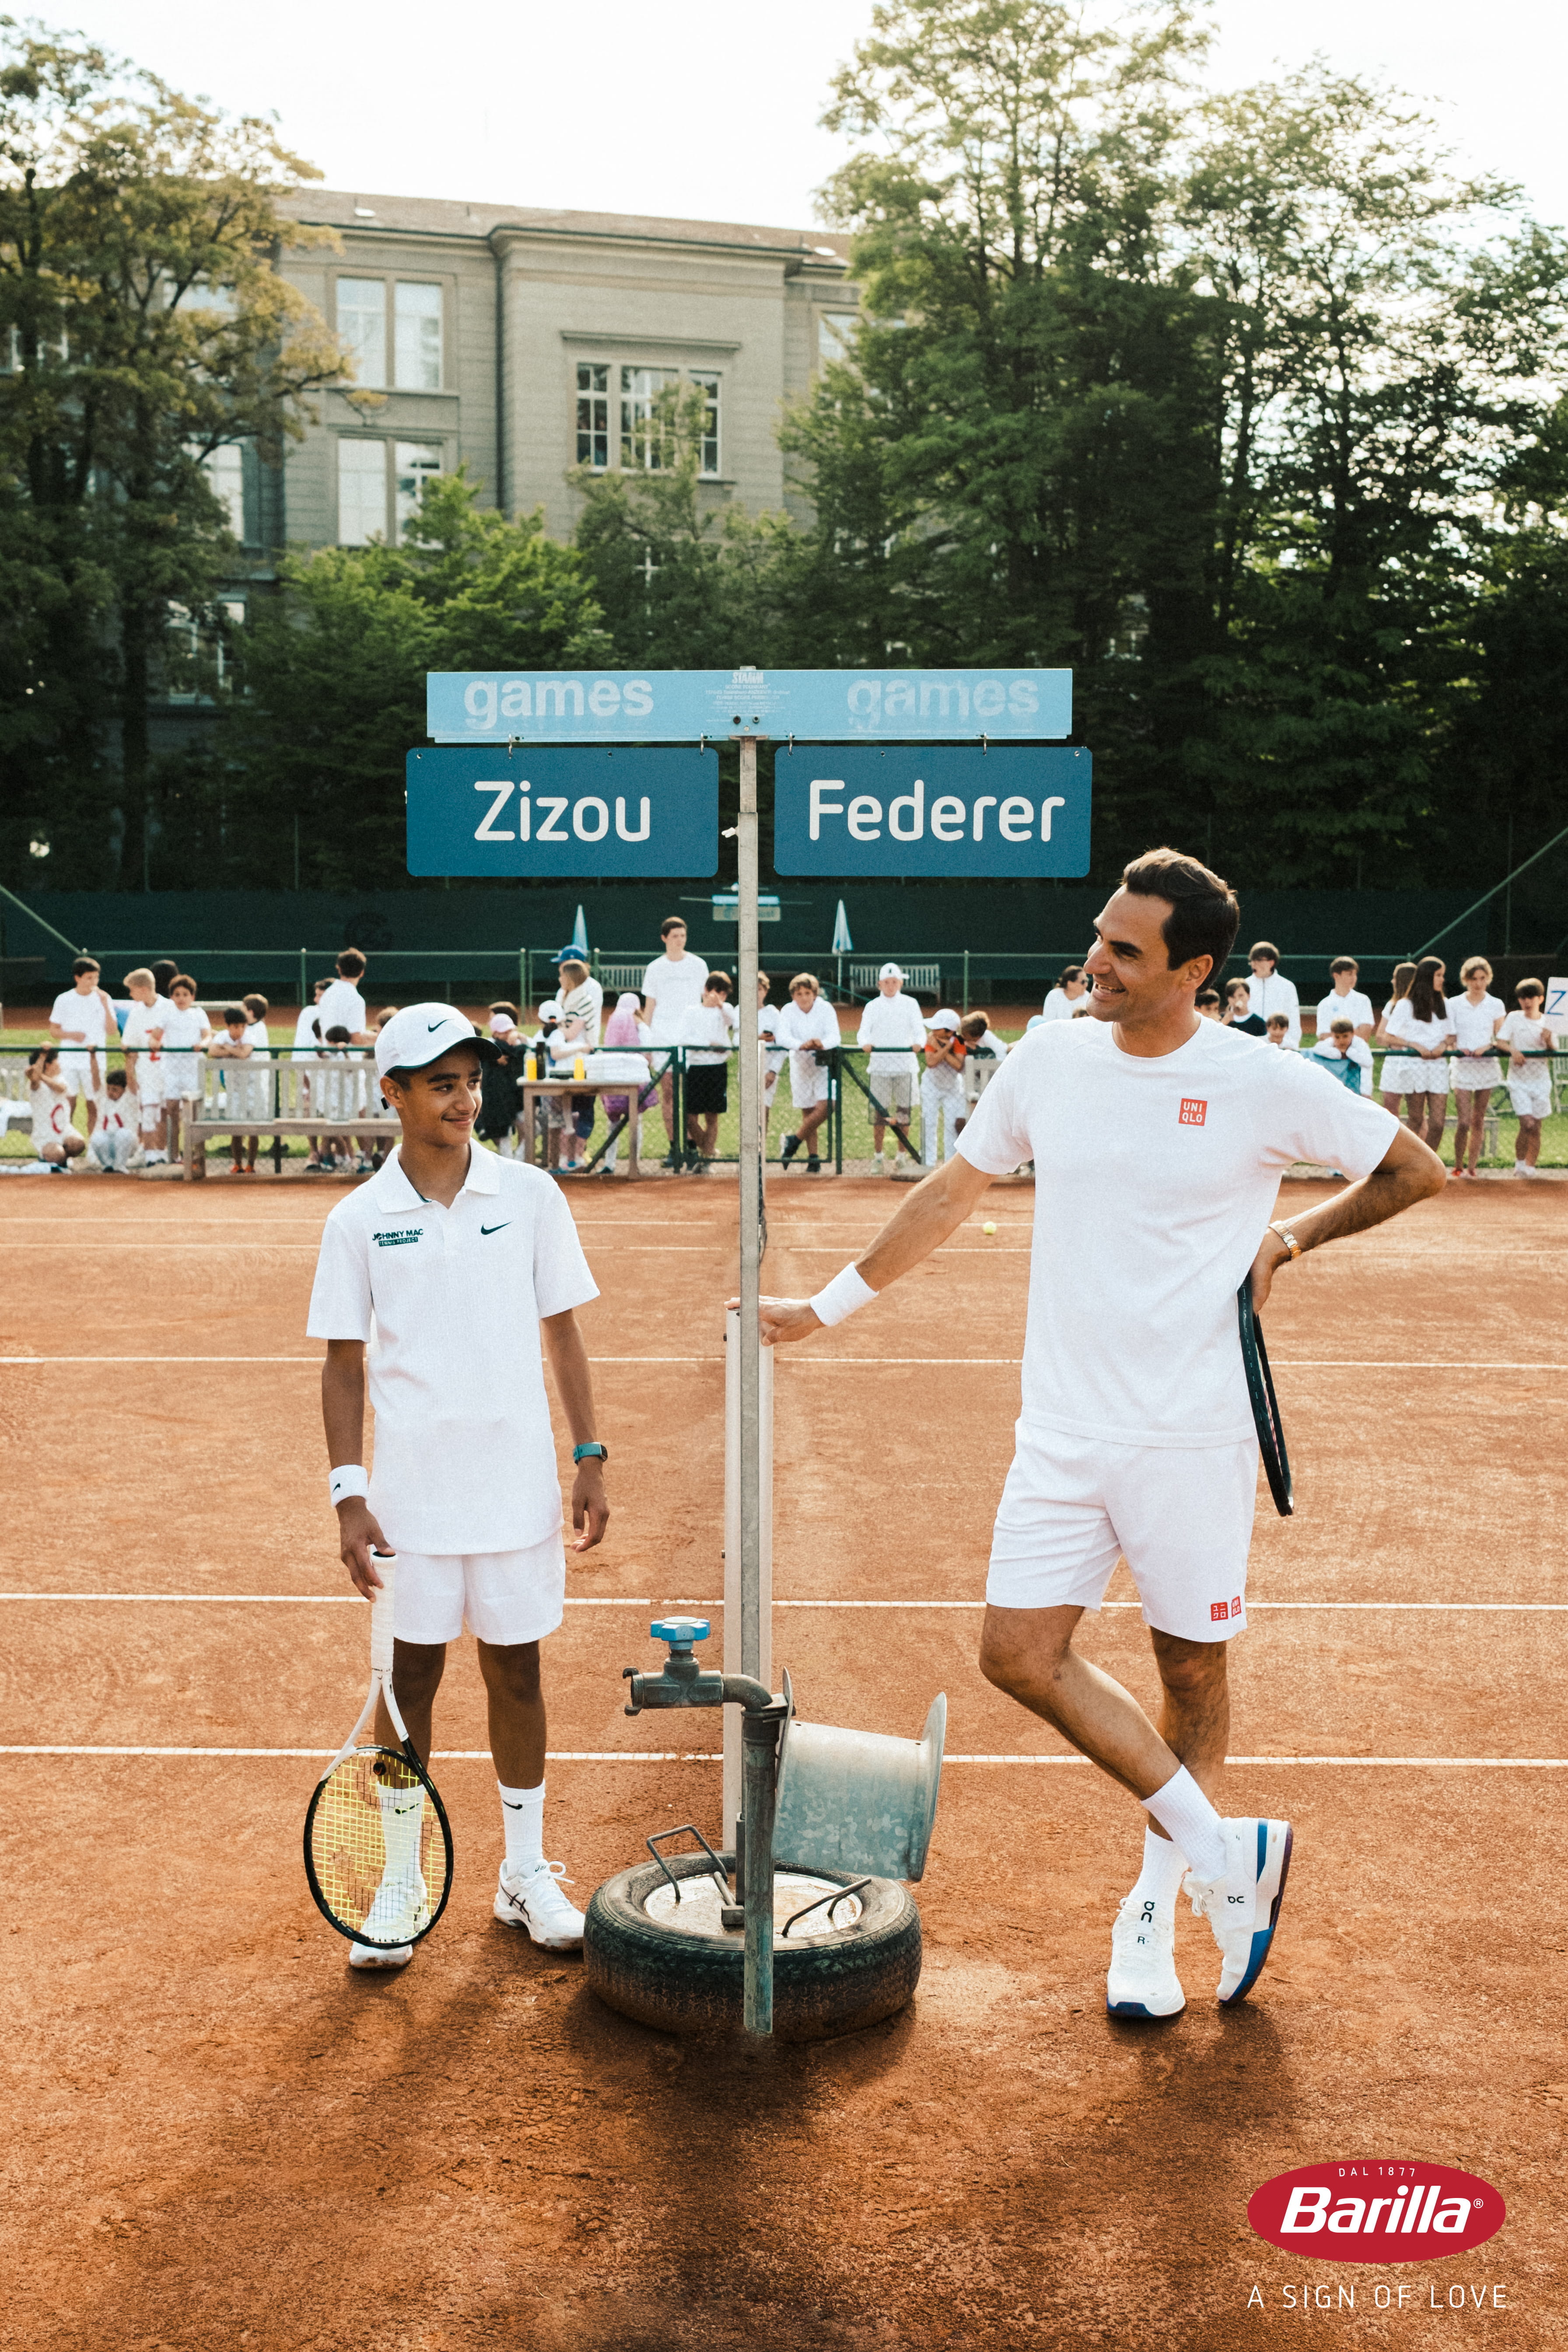 Barilla Presents Roger Federer and Zizou play tennis Masters of Pasta 